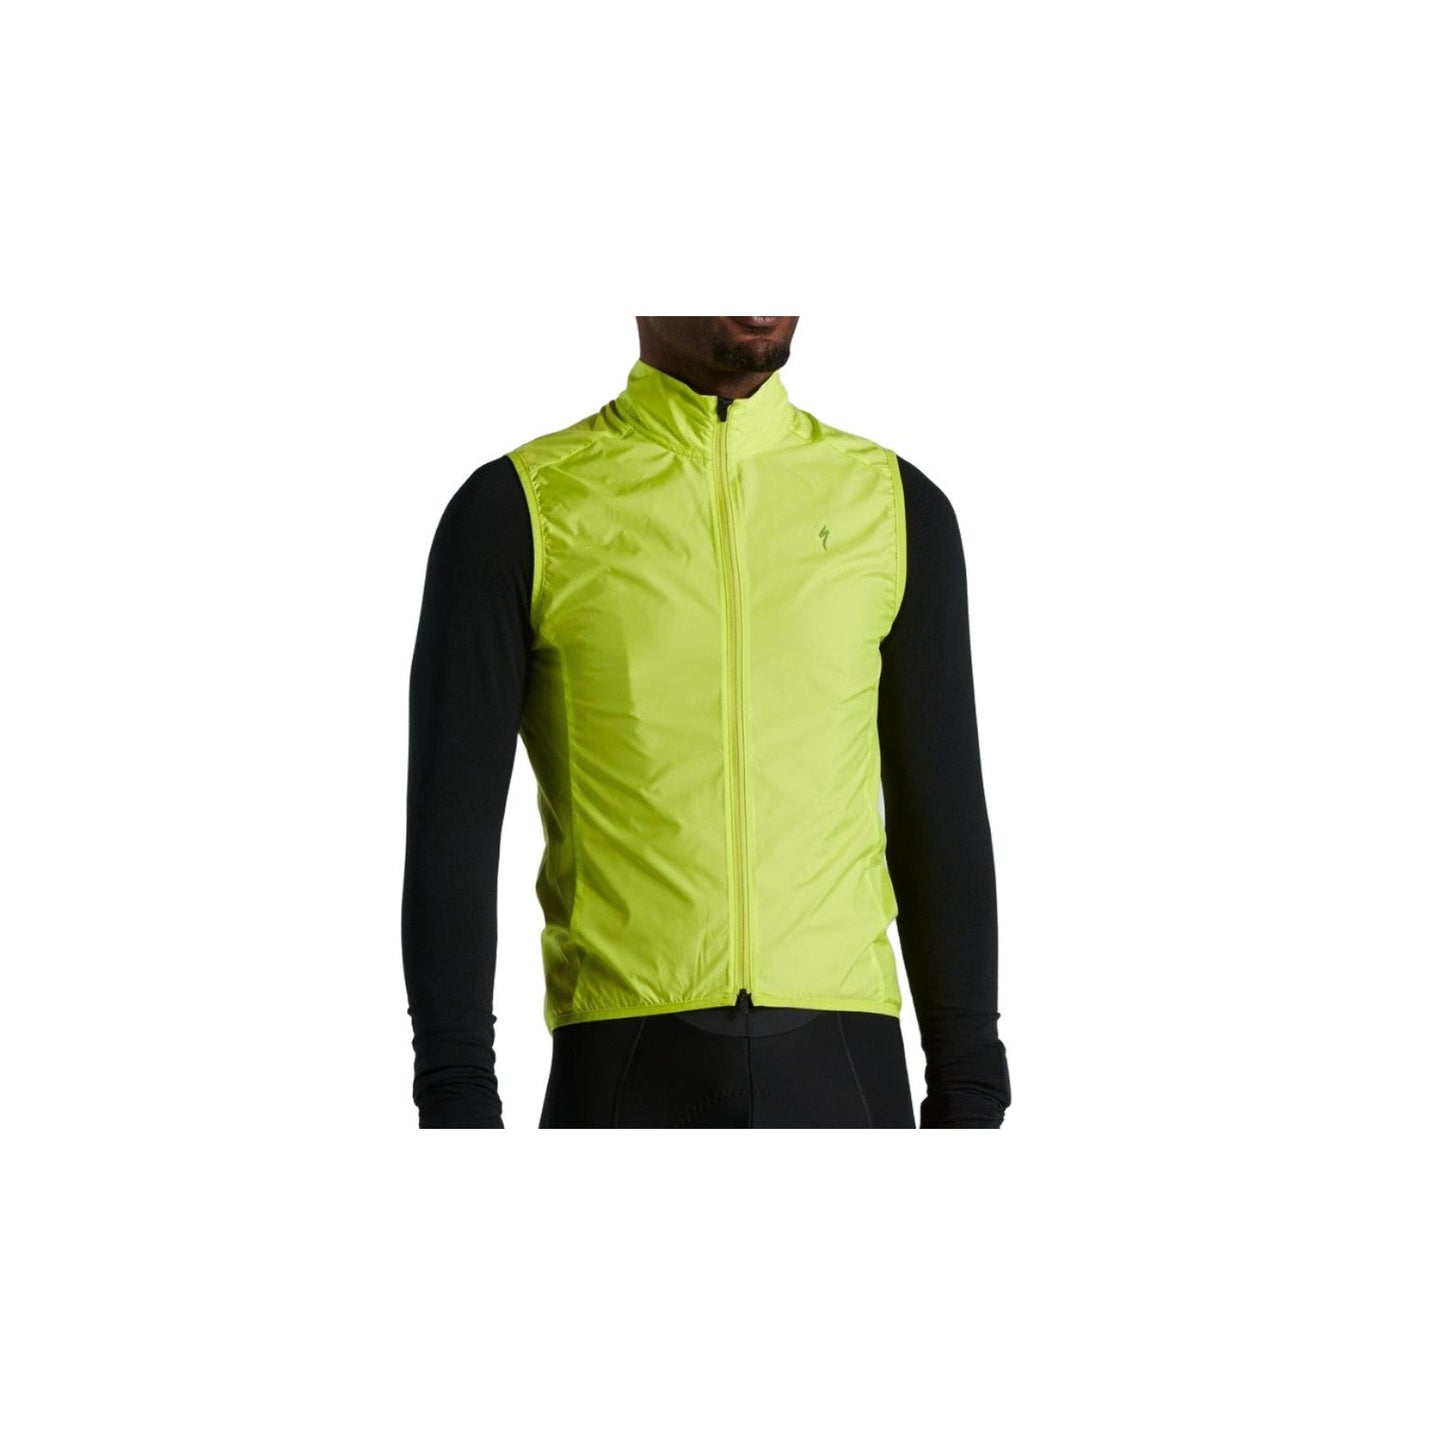 Men's HyprViz SL Pro Wind Gilet | Complete Cyclist - A gilet is arguably the most versatile piece of cycling clothing – perfect for cool mornings, fast descents, and varying temperatures.

